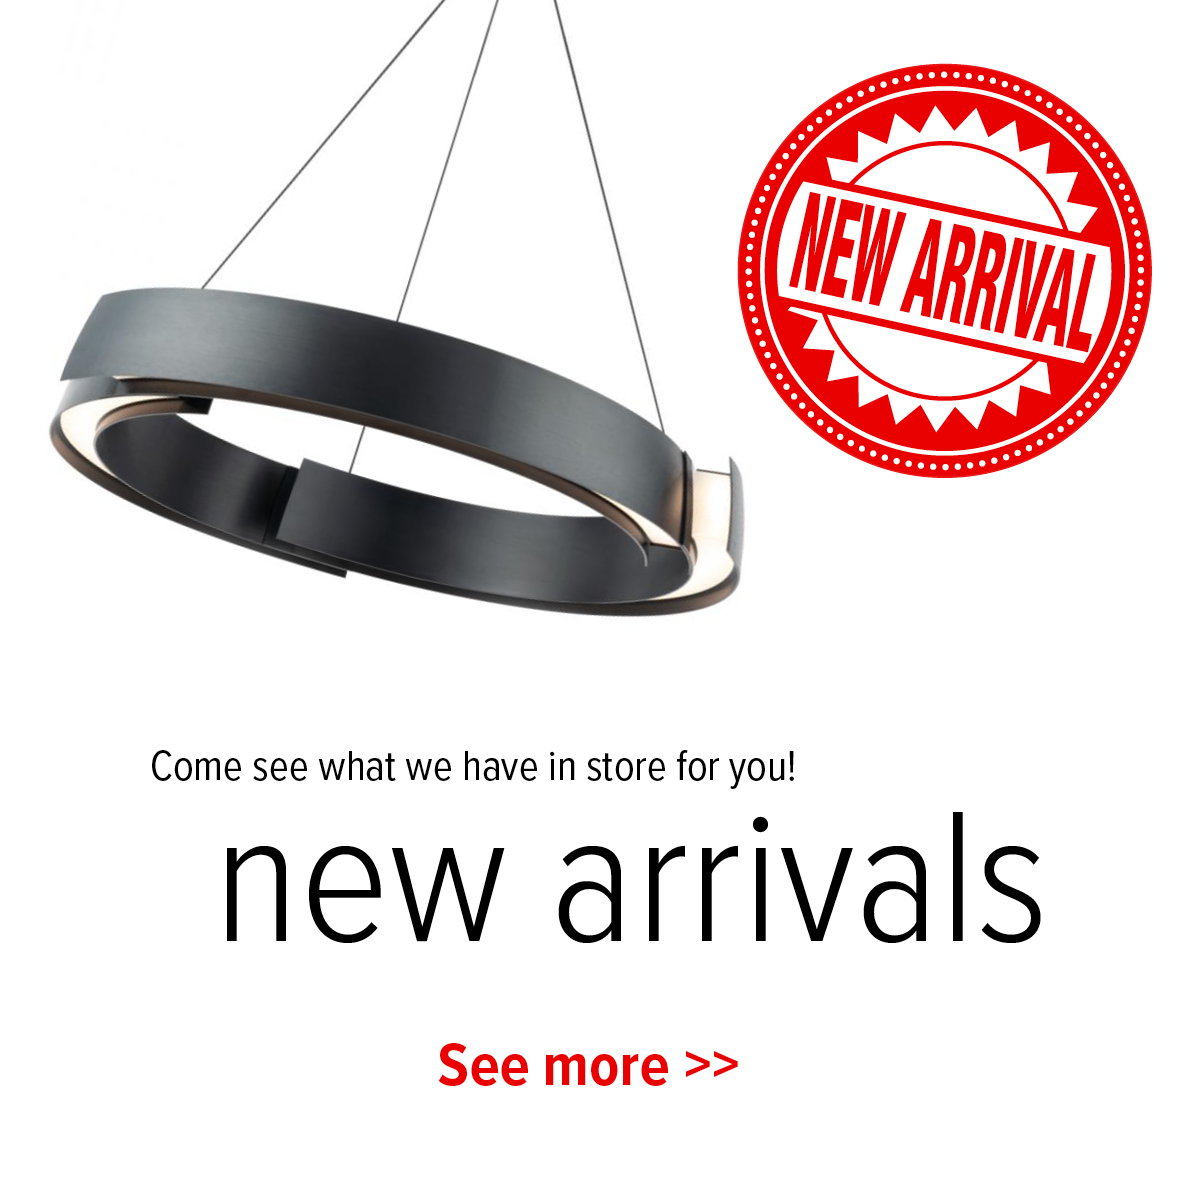 New arrivals - come see what we have in-store for you!